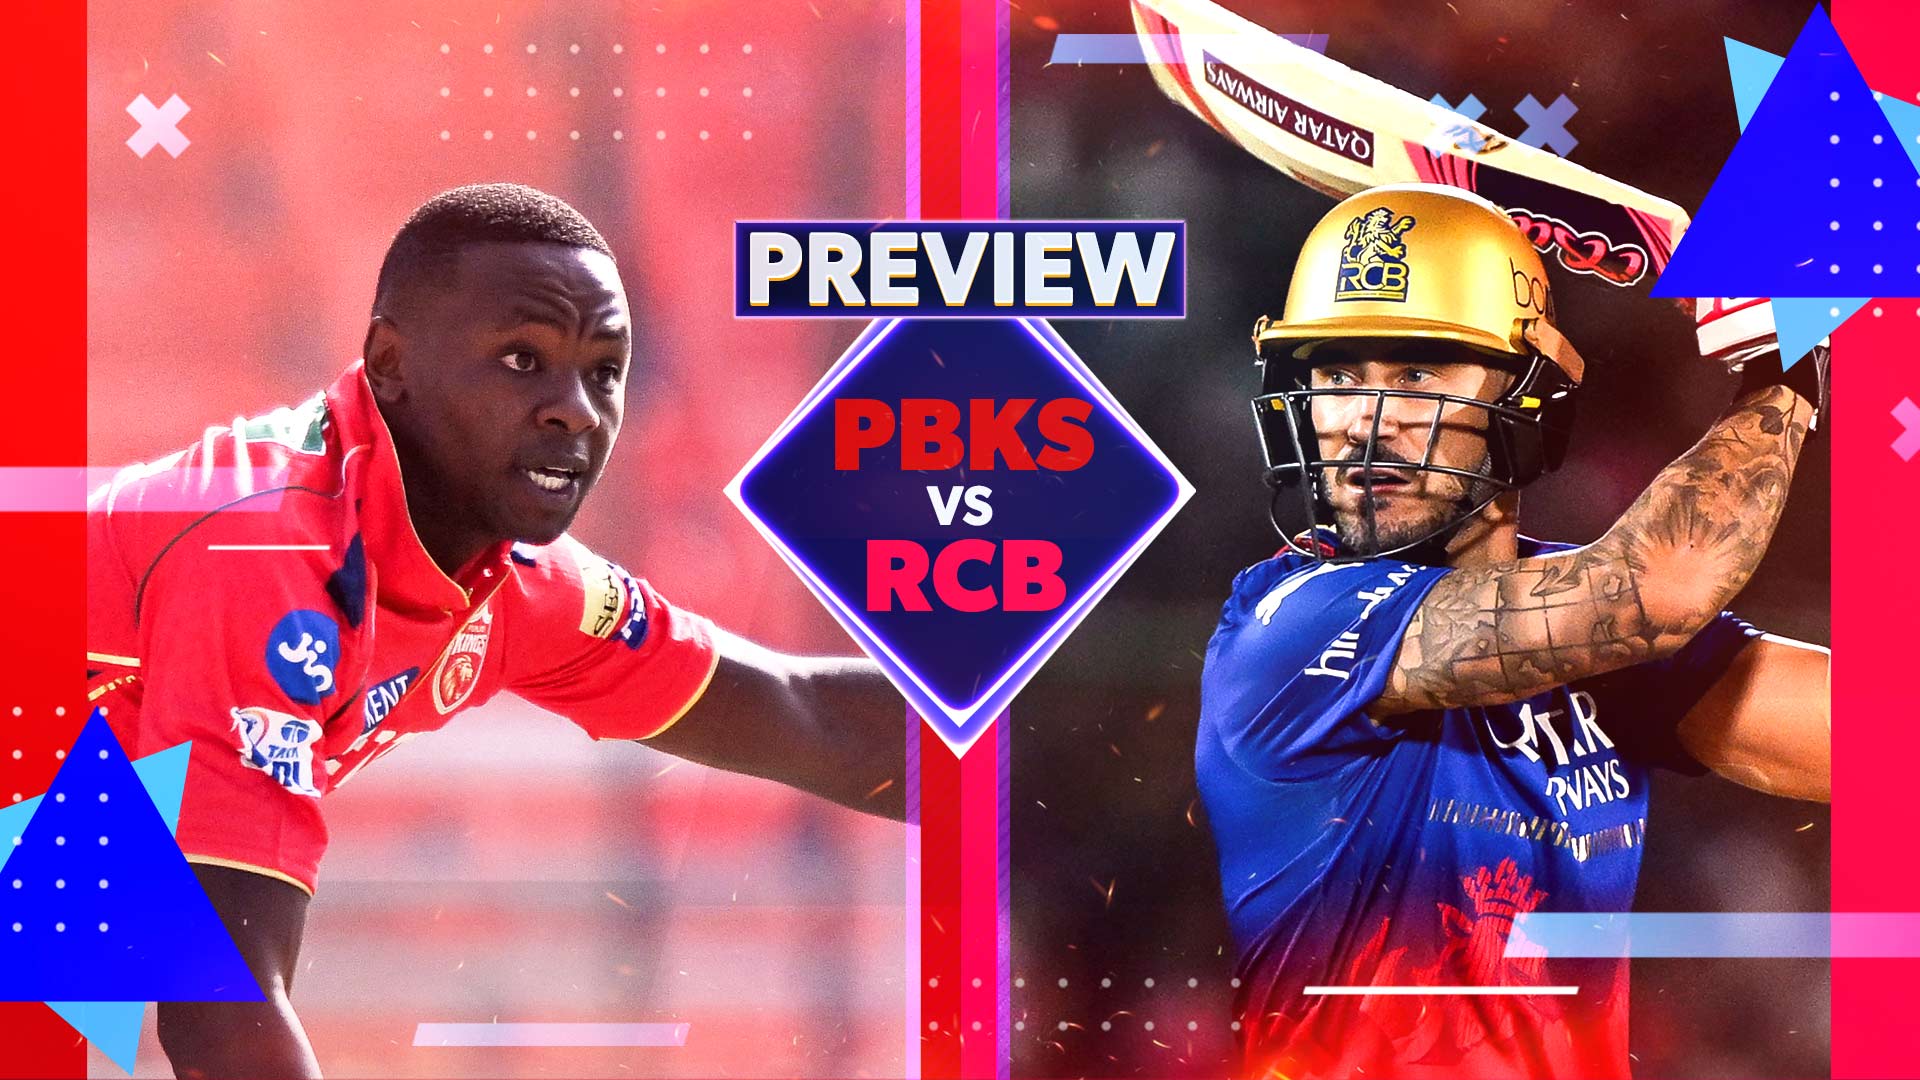 PBKS vs RCB: All You Need to Know